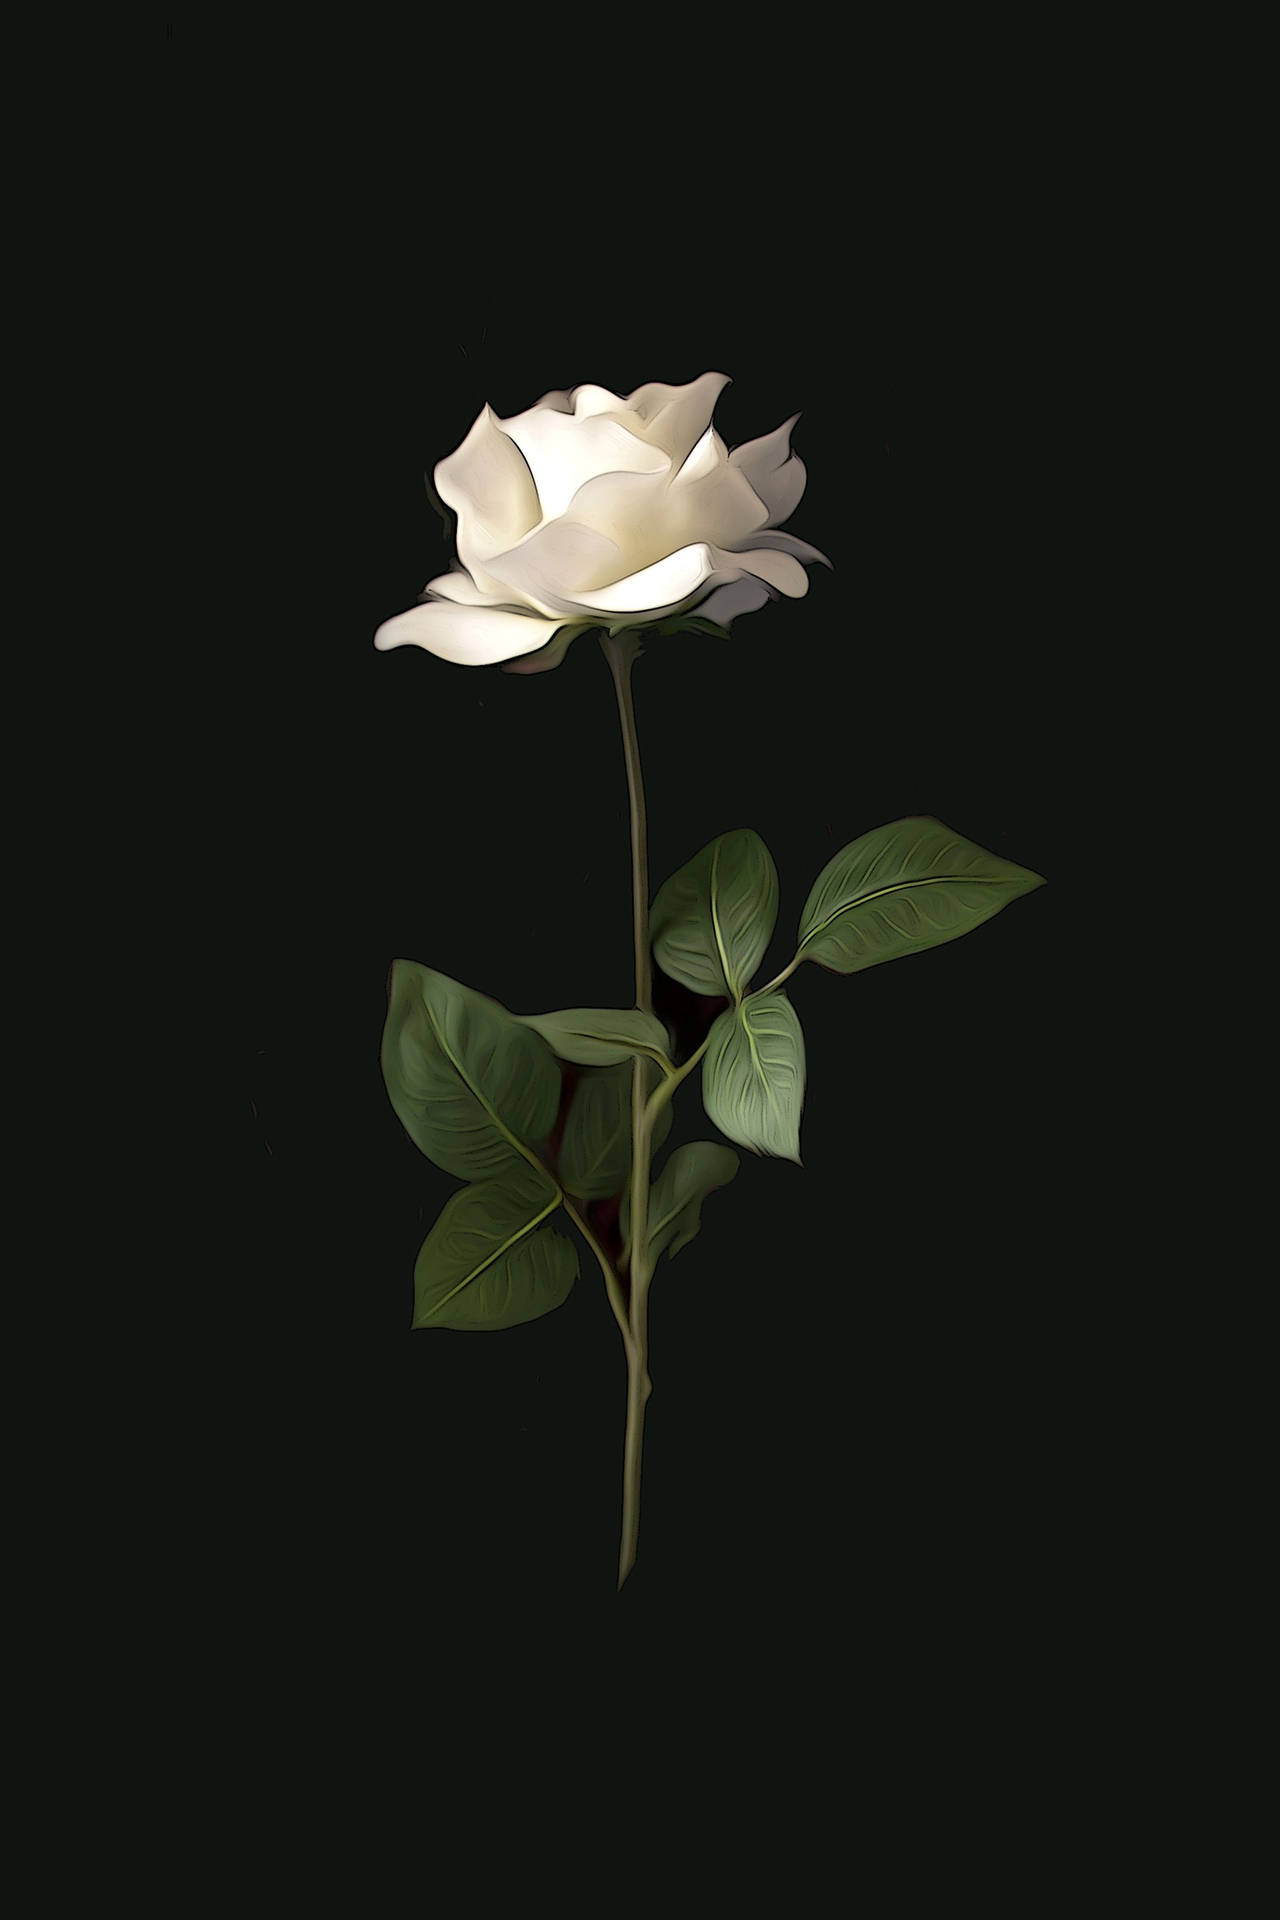 Piece Of White Rose And Black Background Wallpaper